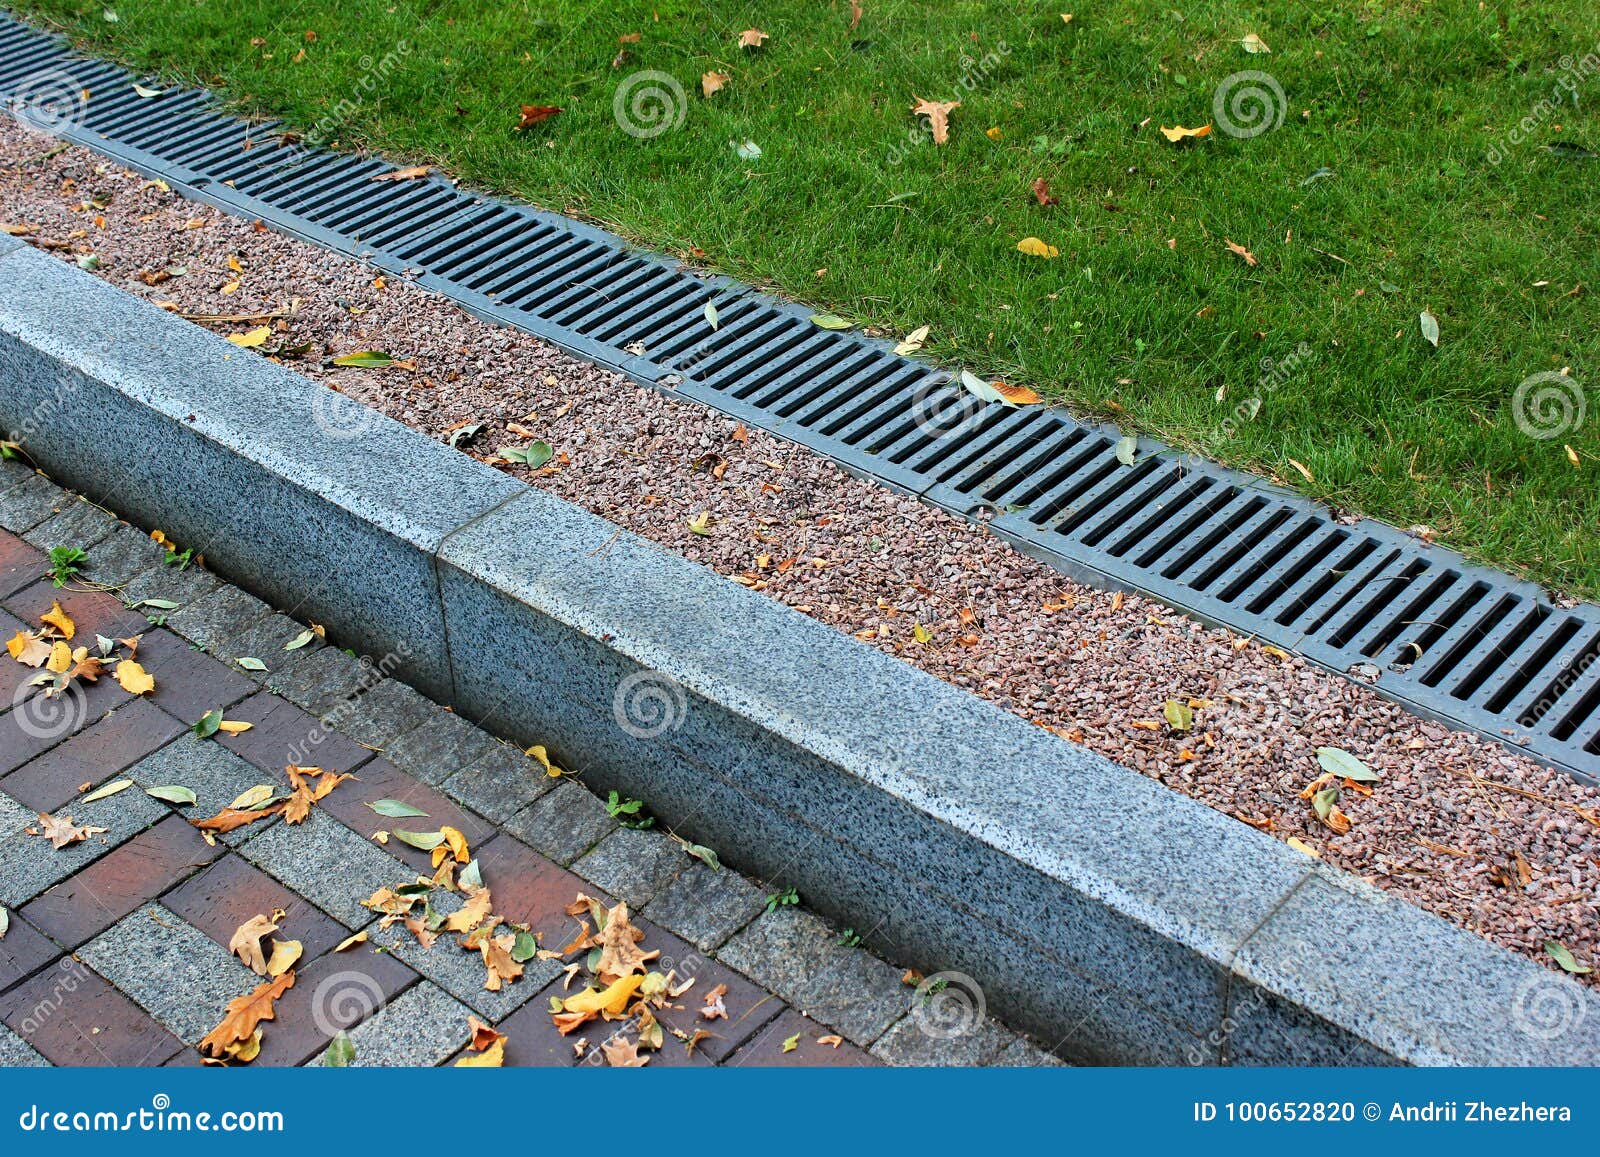 kerbside and rainwater drainage system in a park